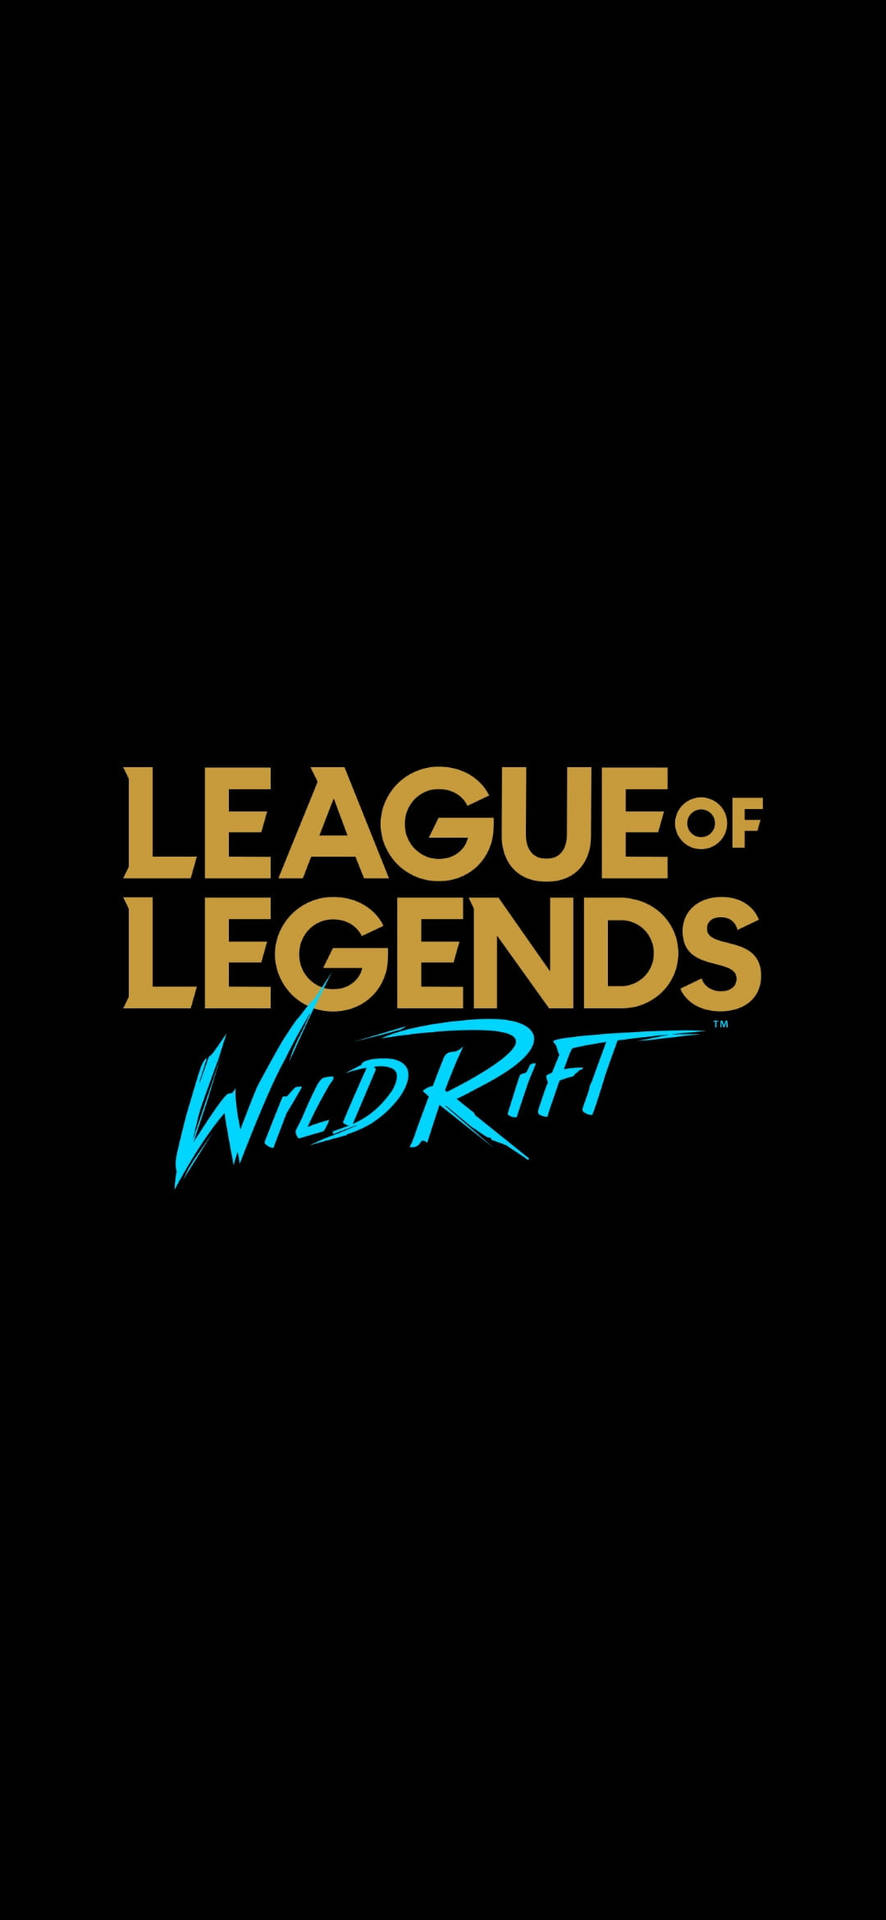 Leagueof Legends Android-logo Wallpaper